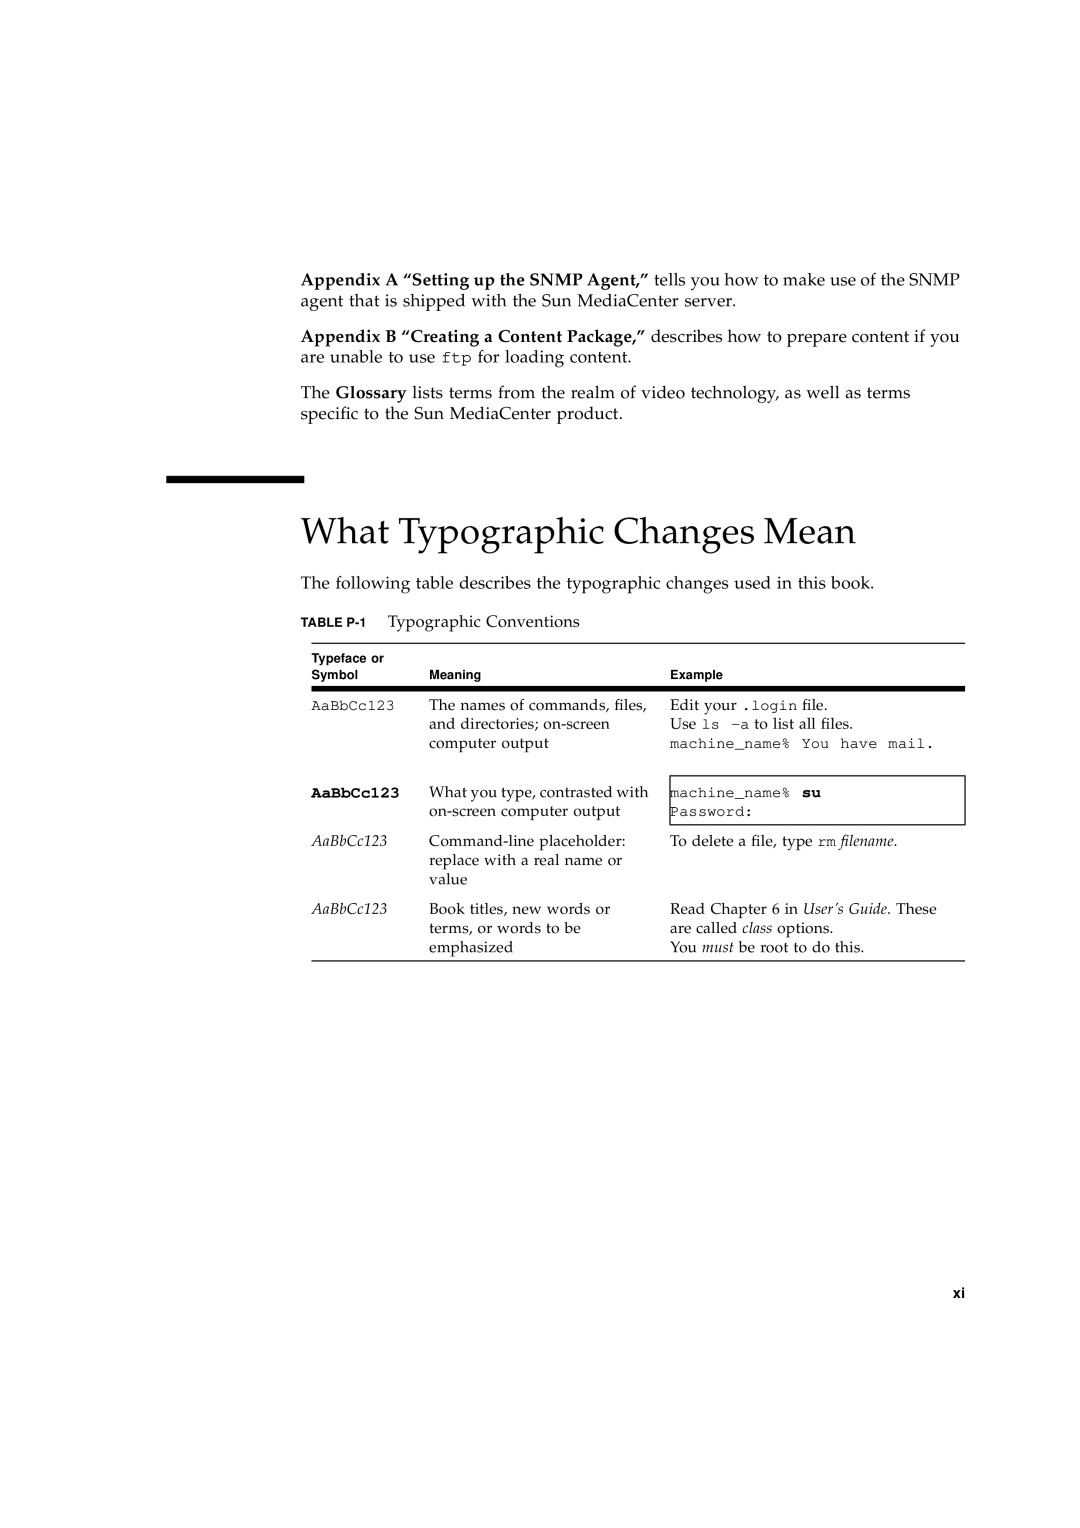 Sun Microsystems 2.1 manual What Typographic Changes Mean, TABLE P-1 Typographic Conventions 